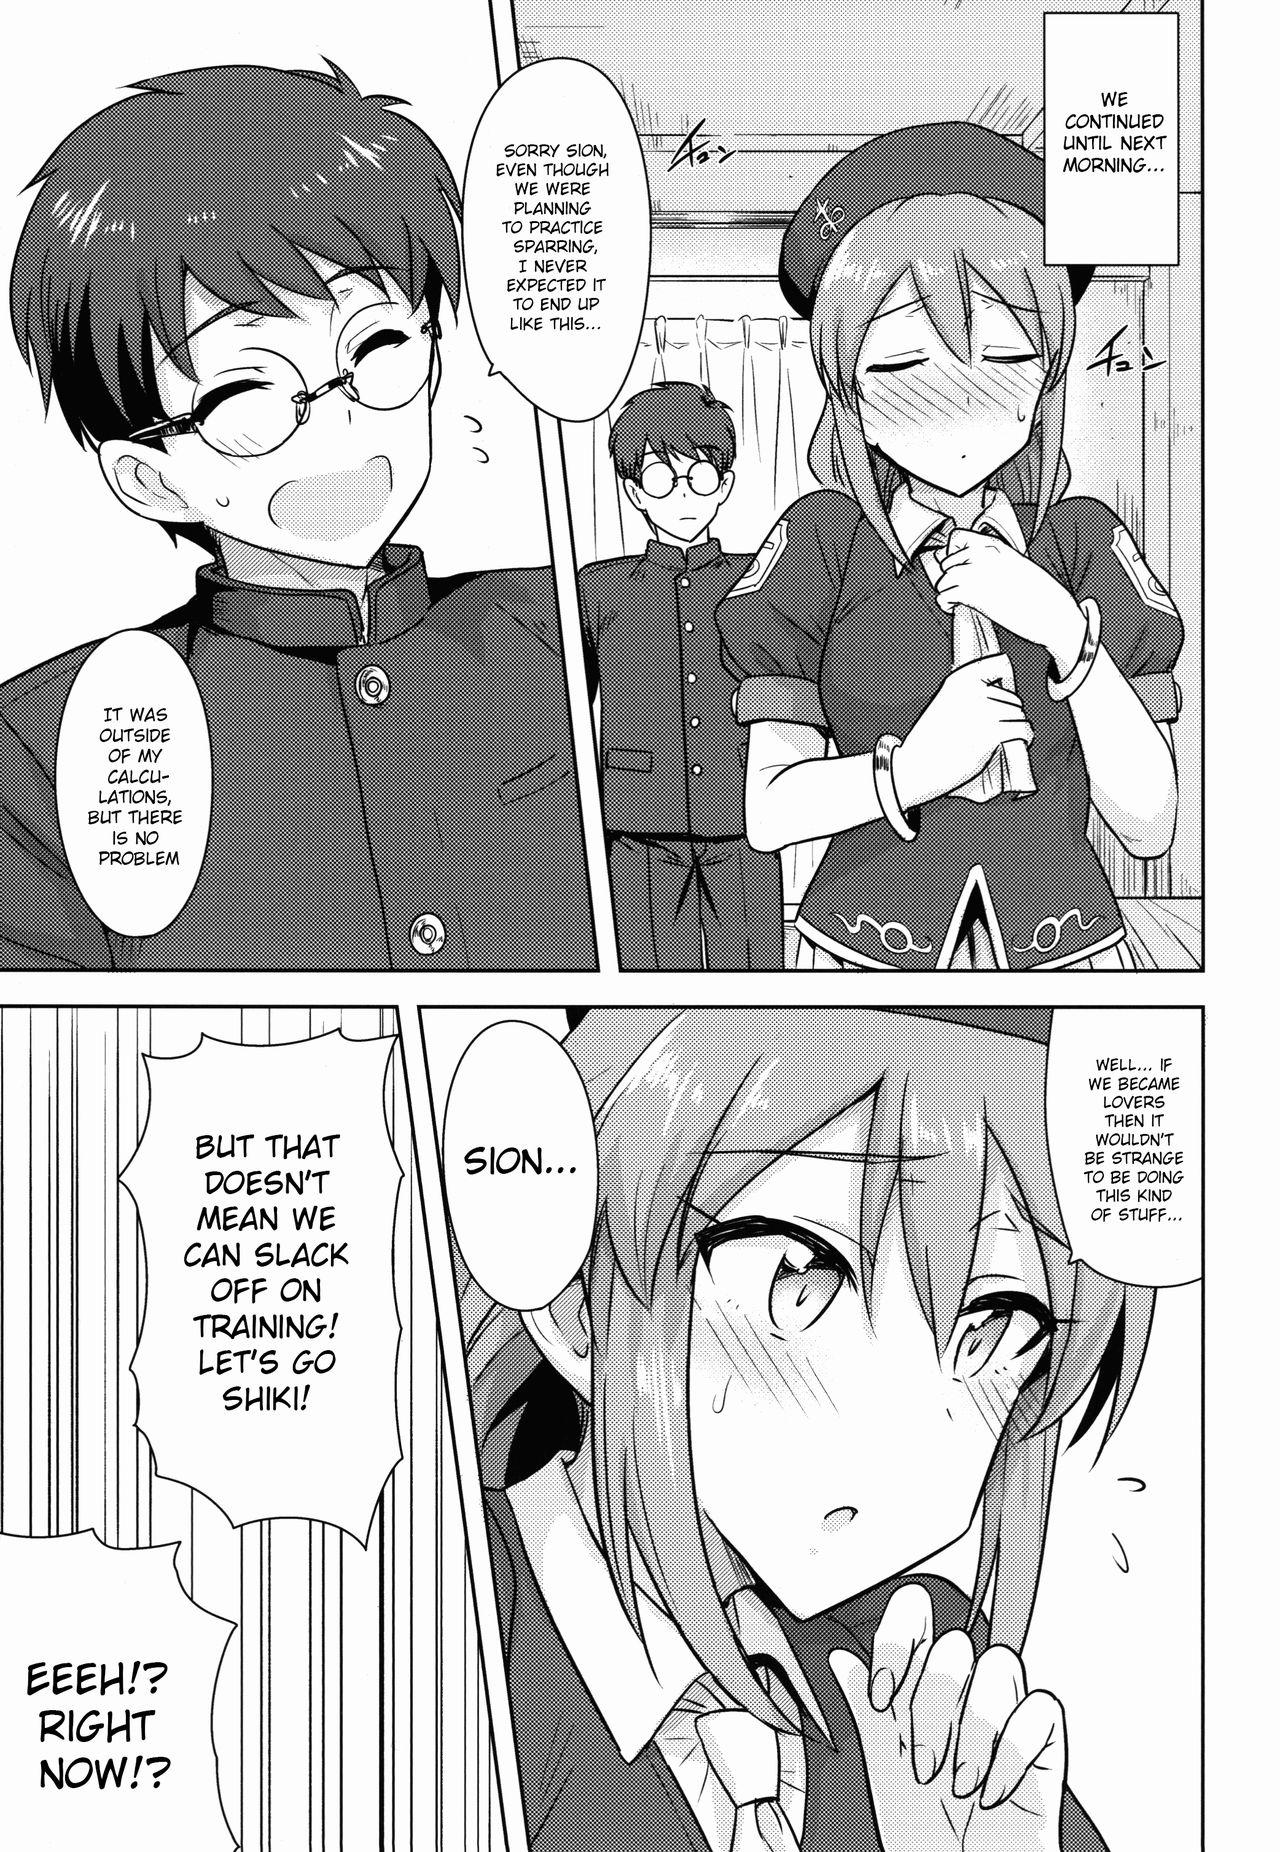 Guy Aru Hi no Futari MelBlo Hen | A Certain Day with Each Other Melty Blood Hen - Tsukihime Ride - Page 8